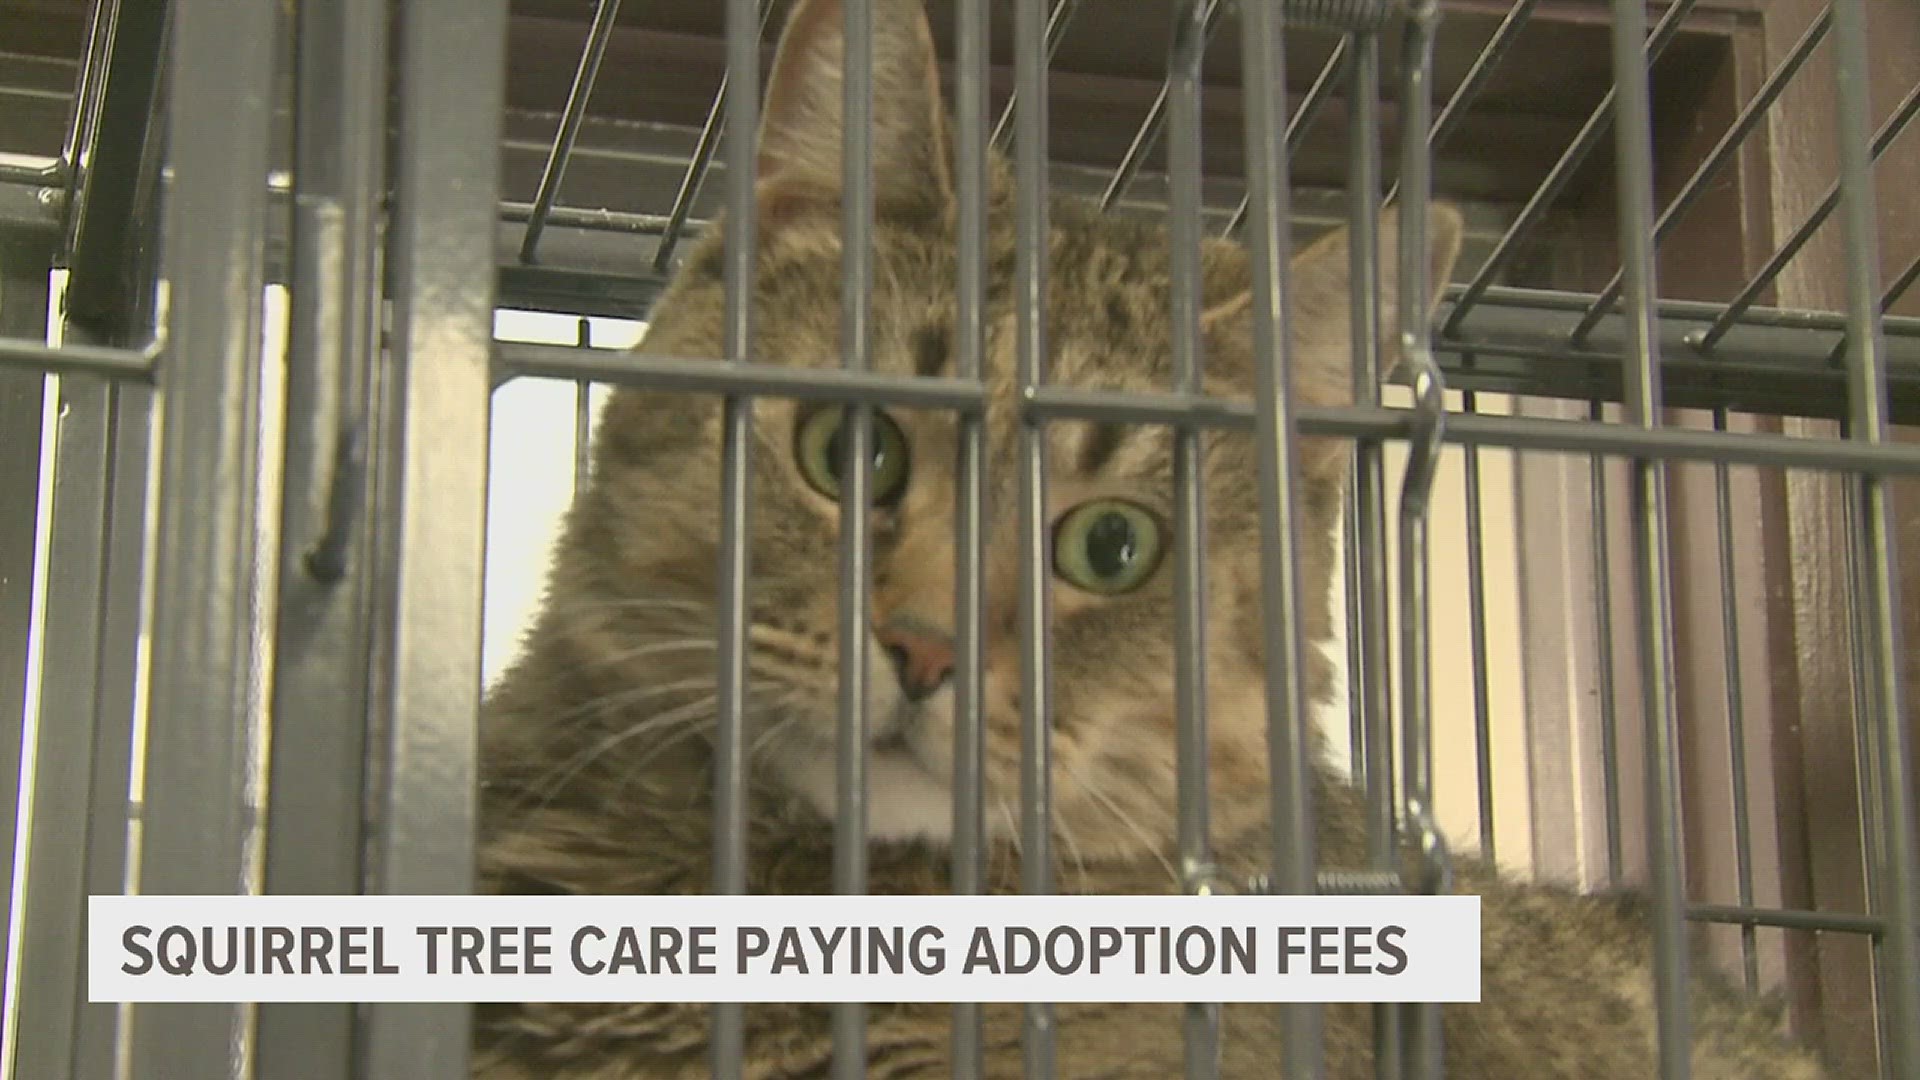 Squirrel Tree Care is paying all adoption fees on Friday in an effort to find these animals a new home.